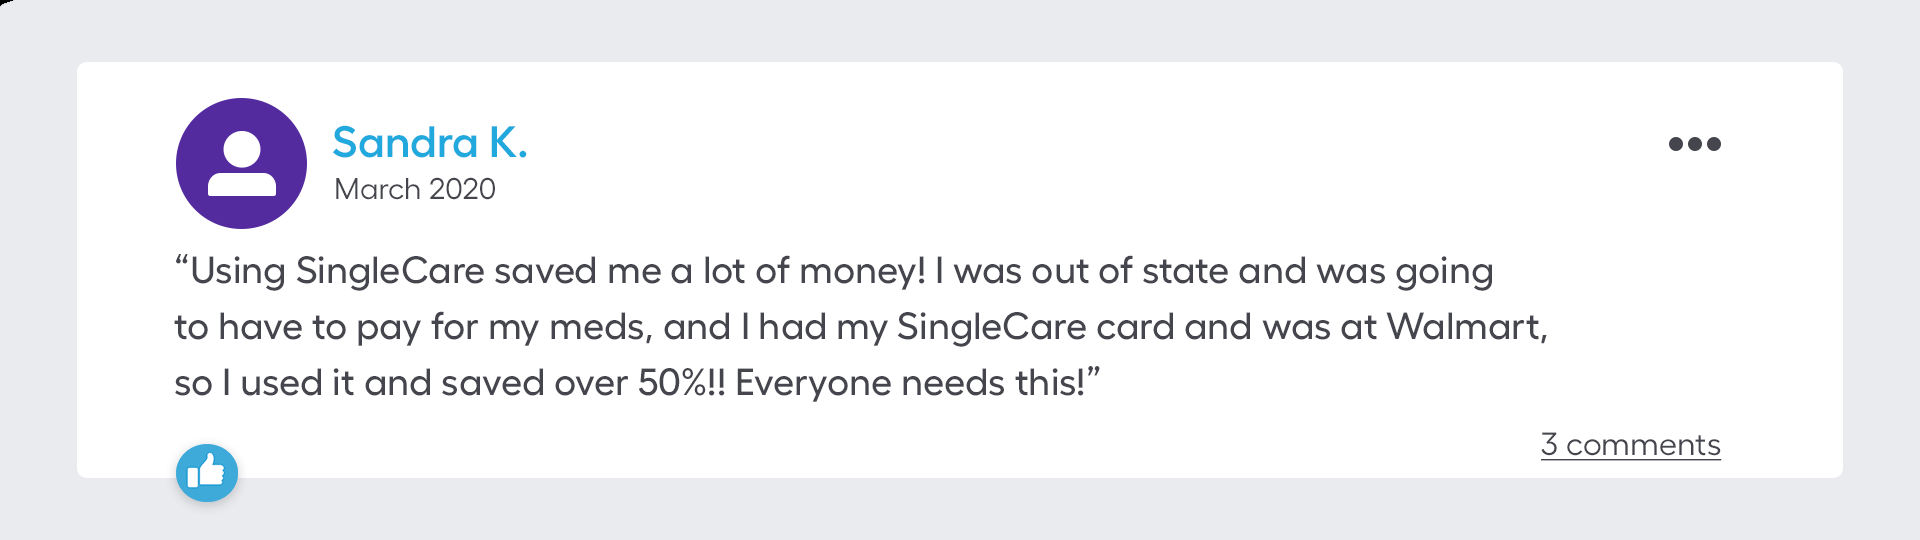 Using SingleCare saved me a lot of money! I was out of state and was going to have to pay for my meds. I had my SingleCare card and was at Walmart, so I used it and saved over 50%!! Everyone needs this!